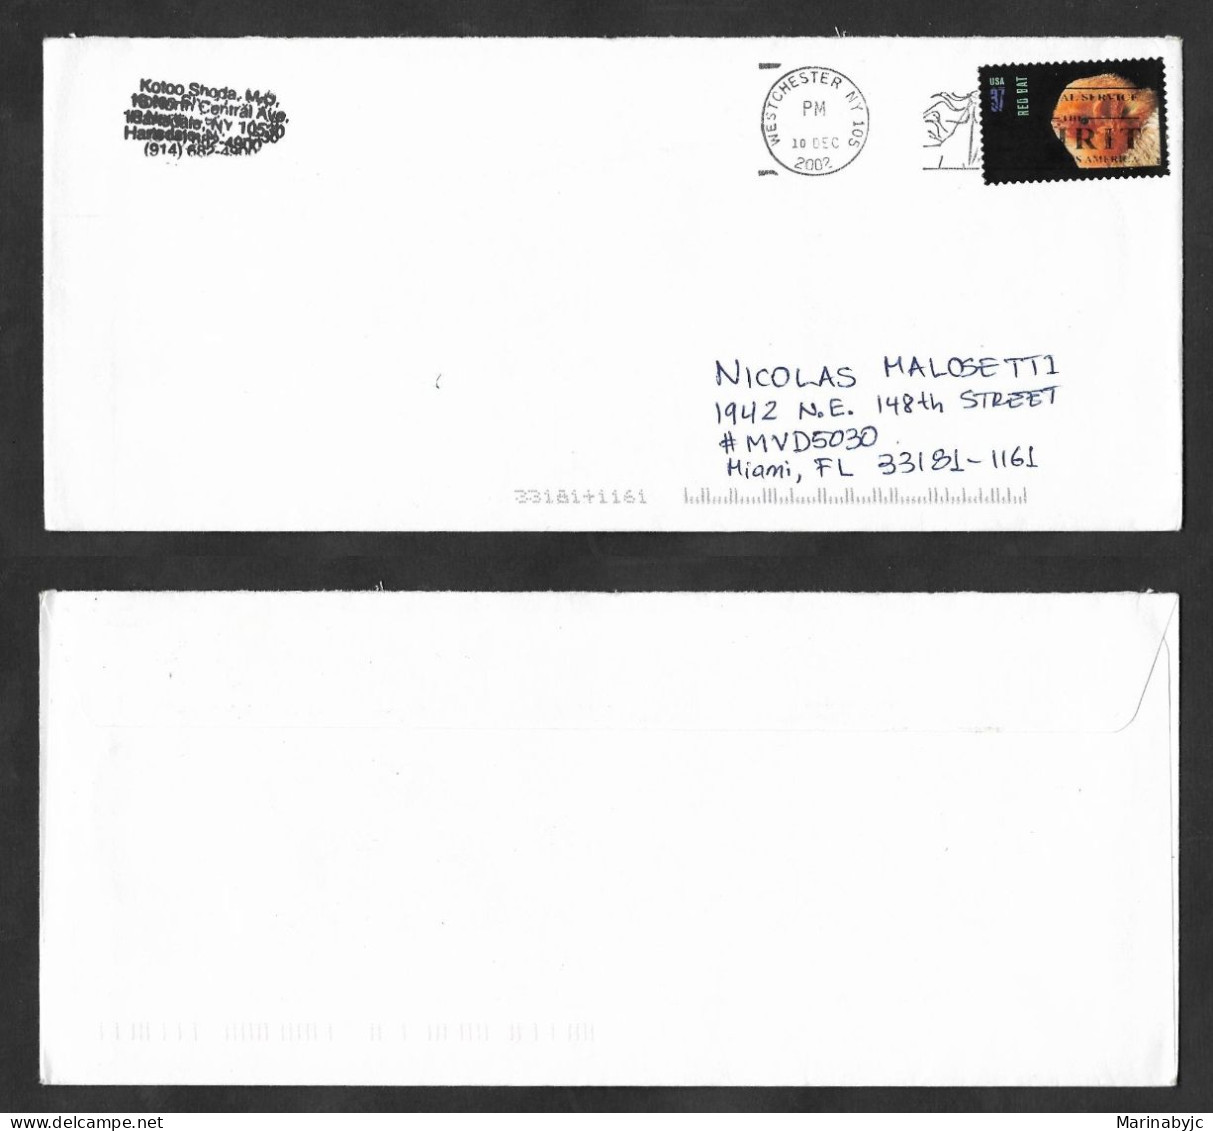 SE)2002 UNITED STATES, BATS OF AMERICA, RED BAT, CIRCULATED COVER FROM NEW YORK TO MIAMI USA, VF - Gebraucht